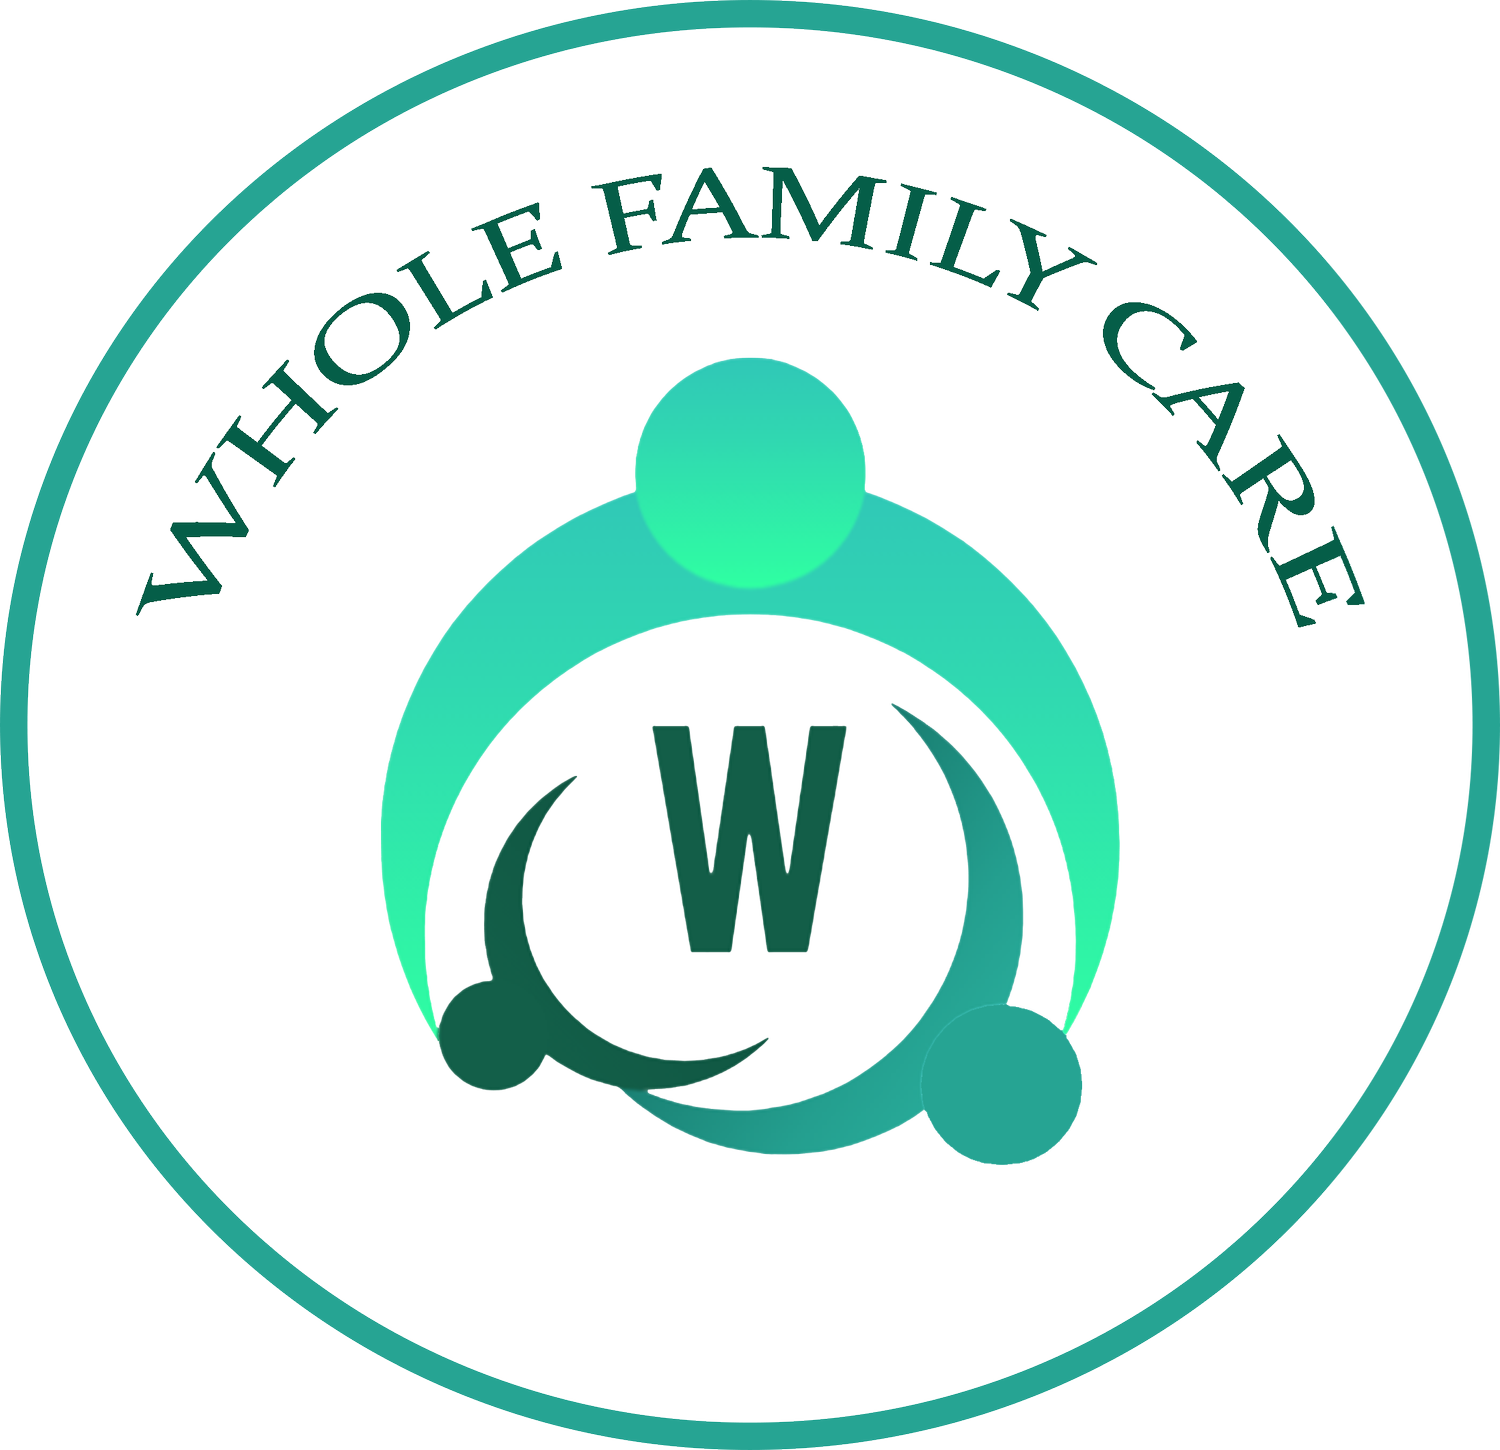 Wellness at Whole Family Care